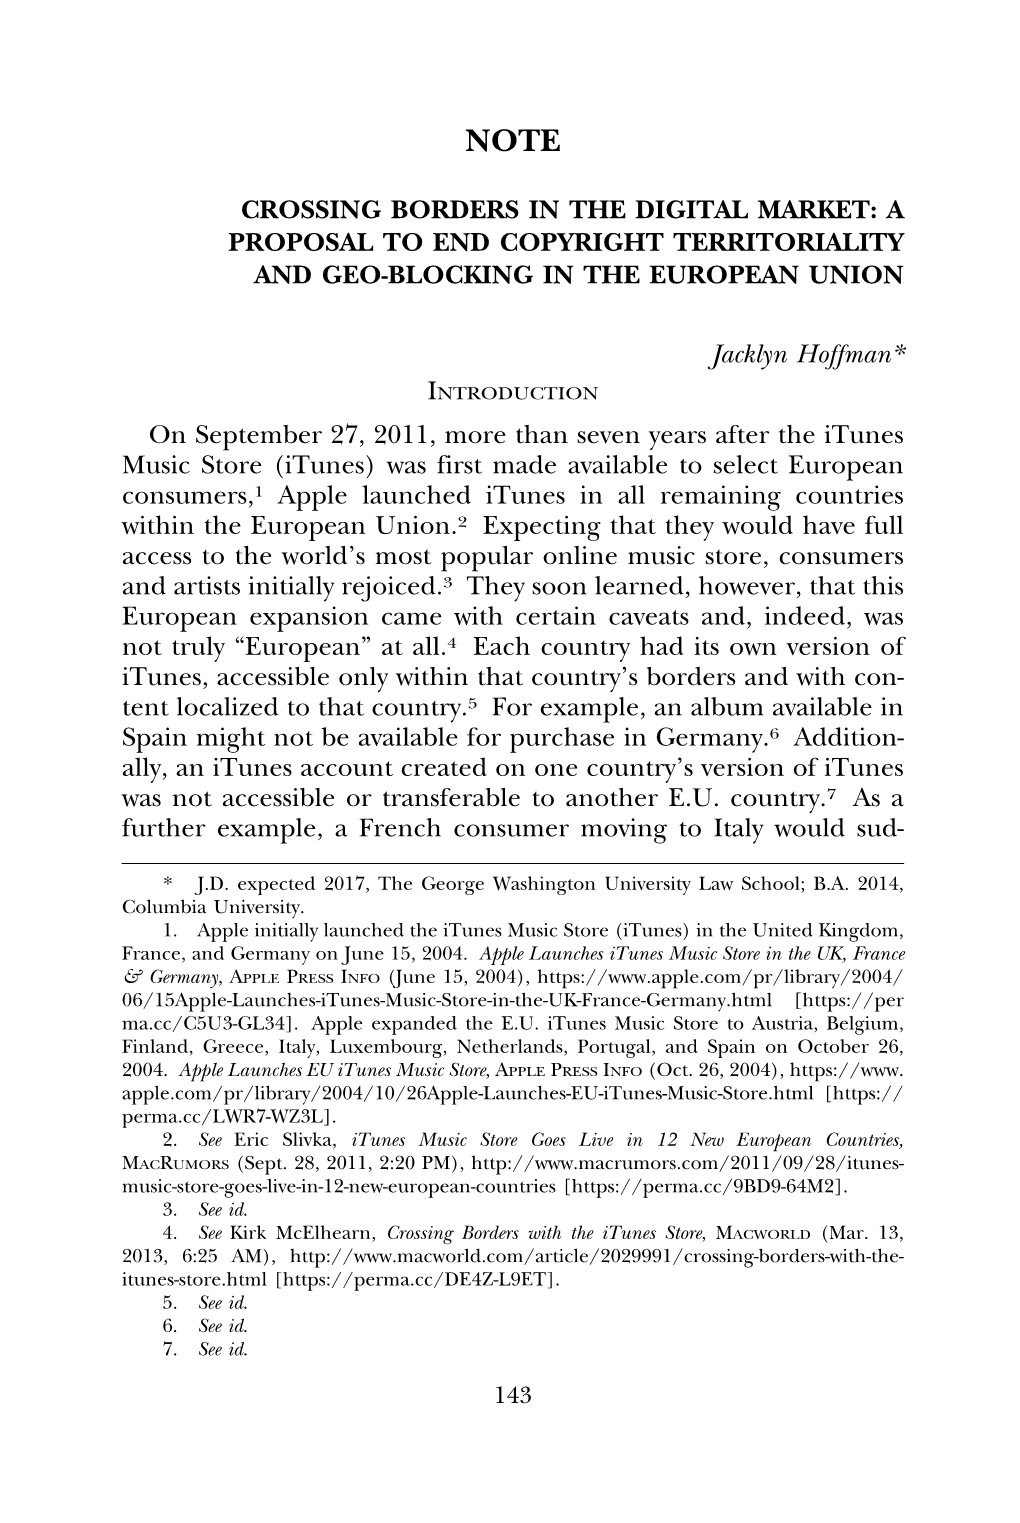 Crossing Borders in the Digital Market: a Proposal to End Copyright Territoriality and Geo-Blocking in the European Union